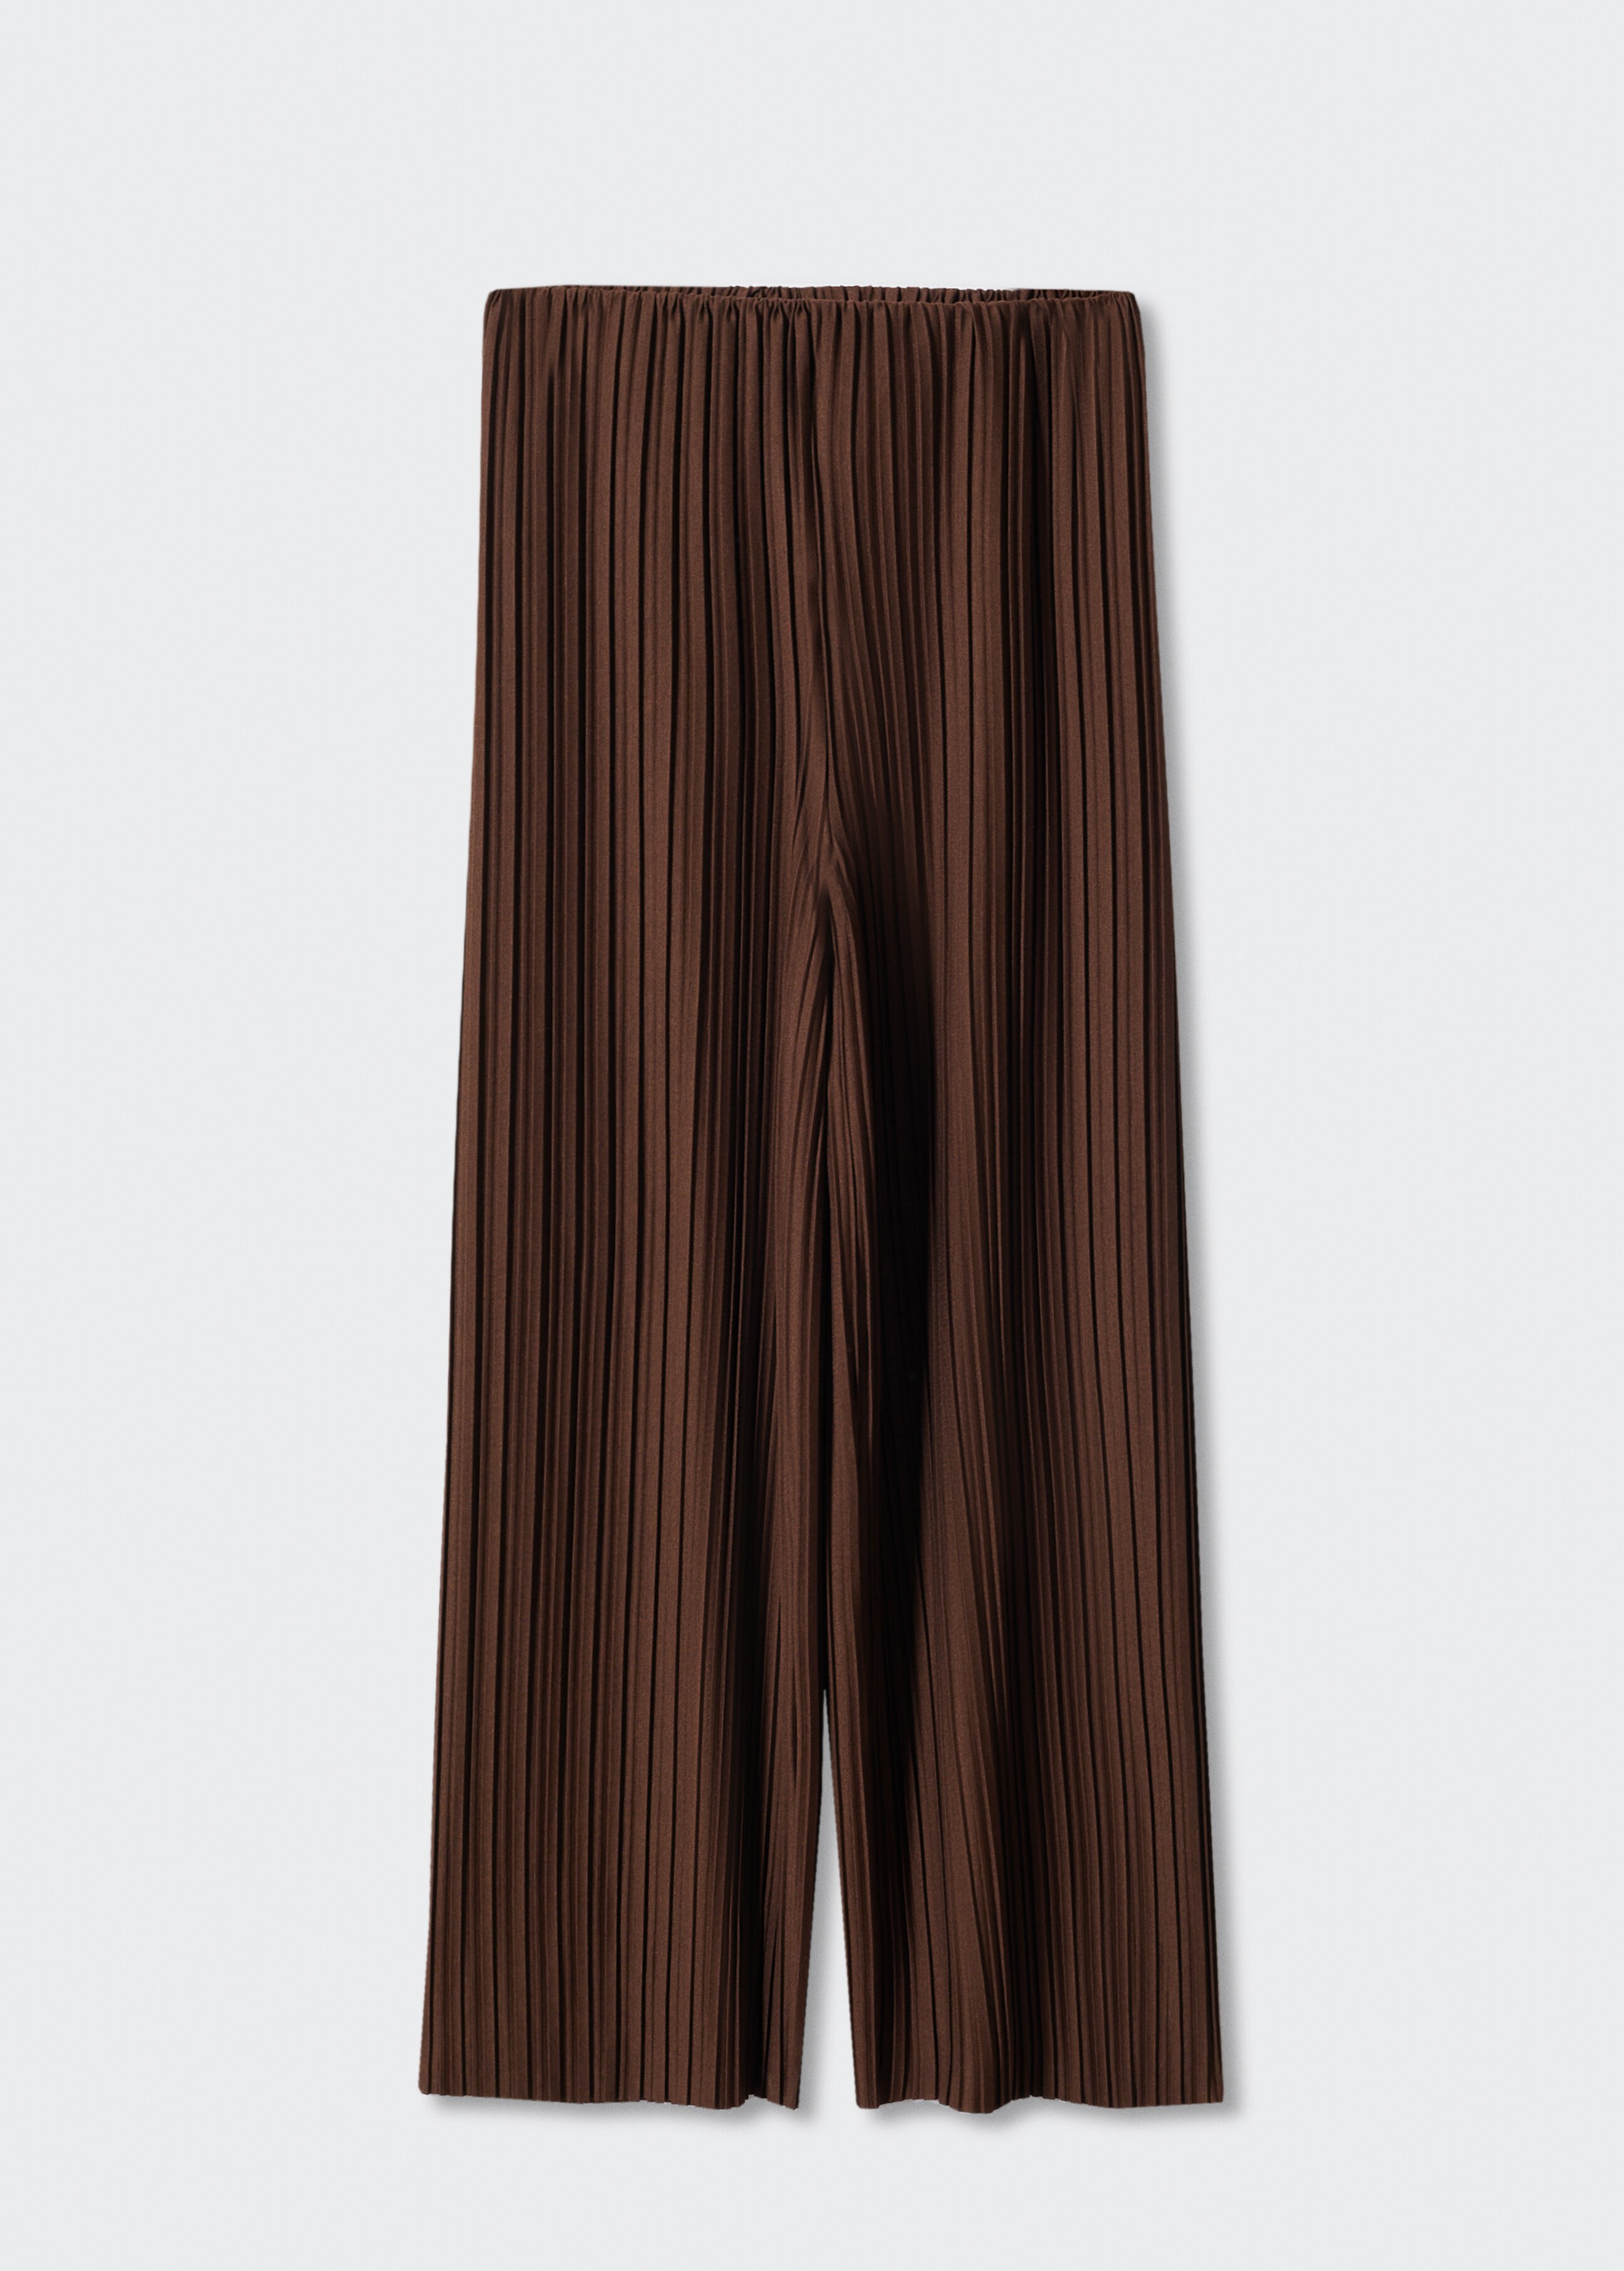 Pleated palazzo pants - Article without model